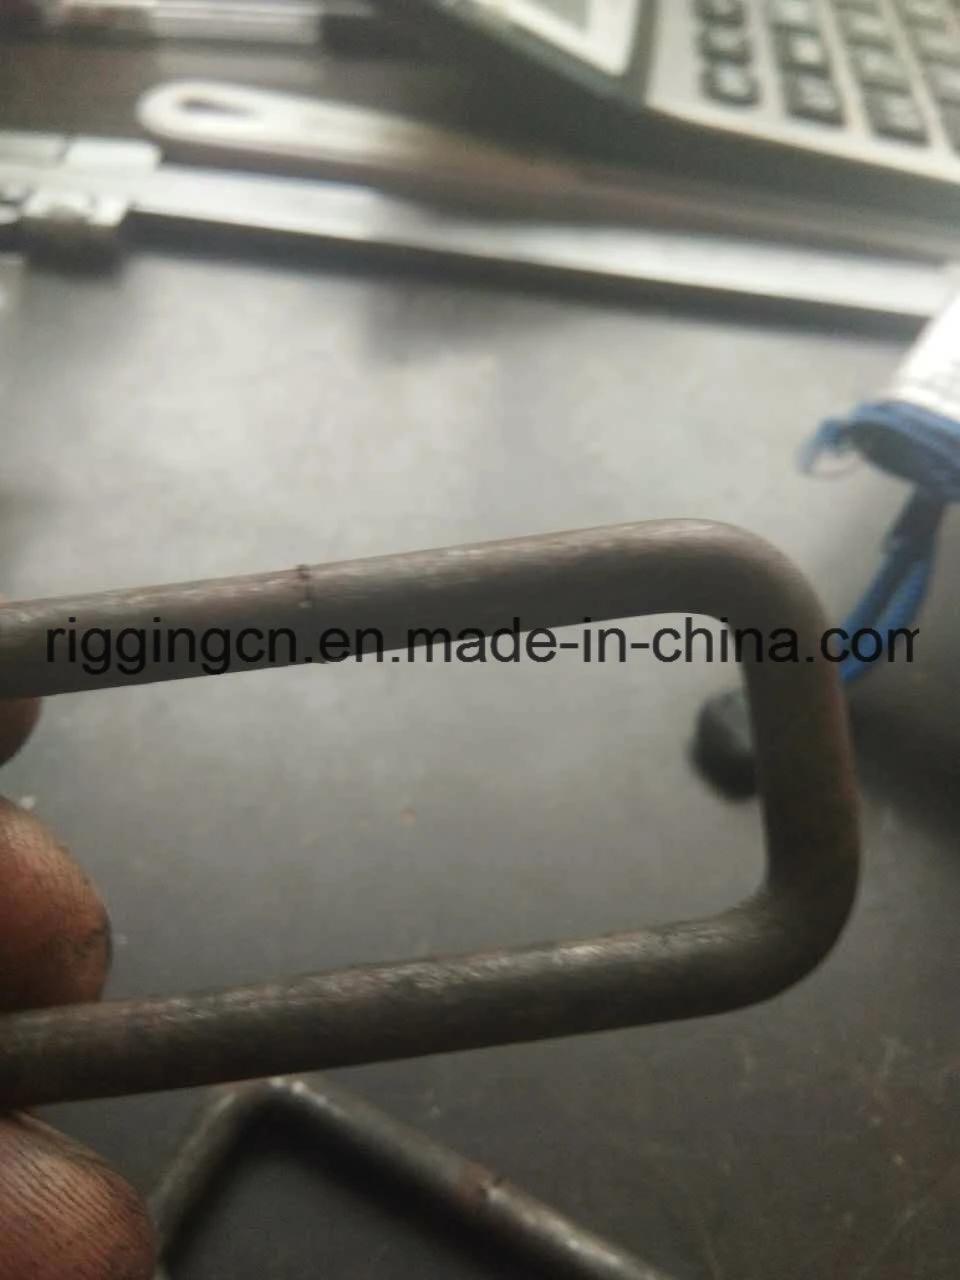 Long Chain Link for Handle